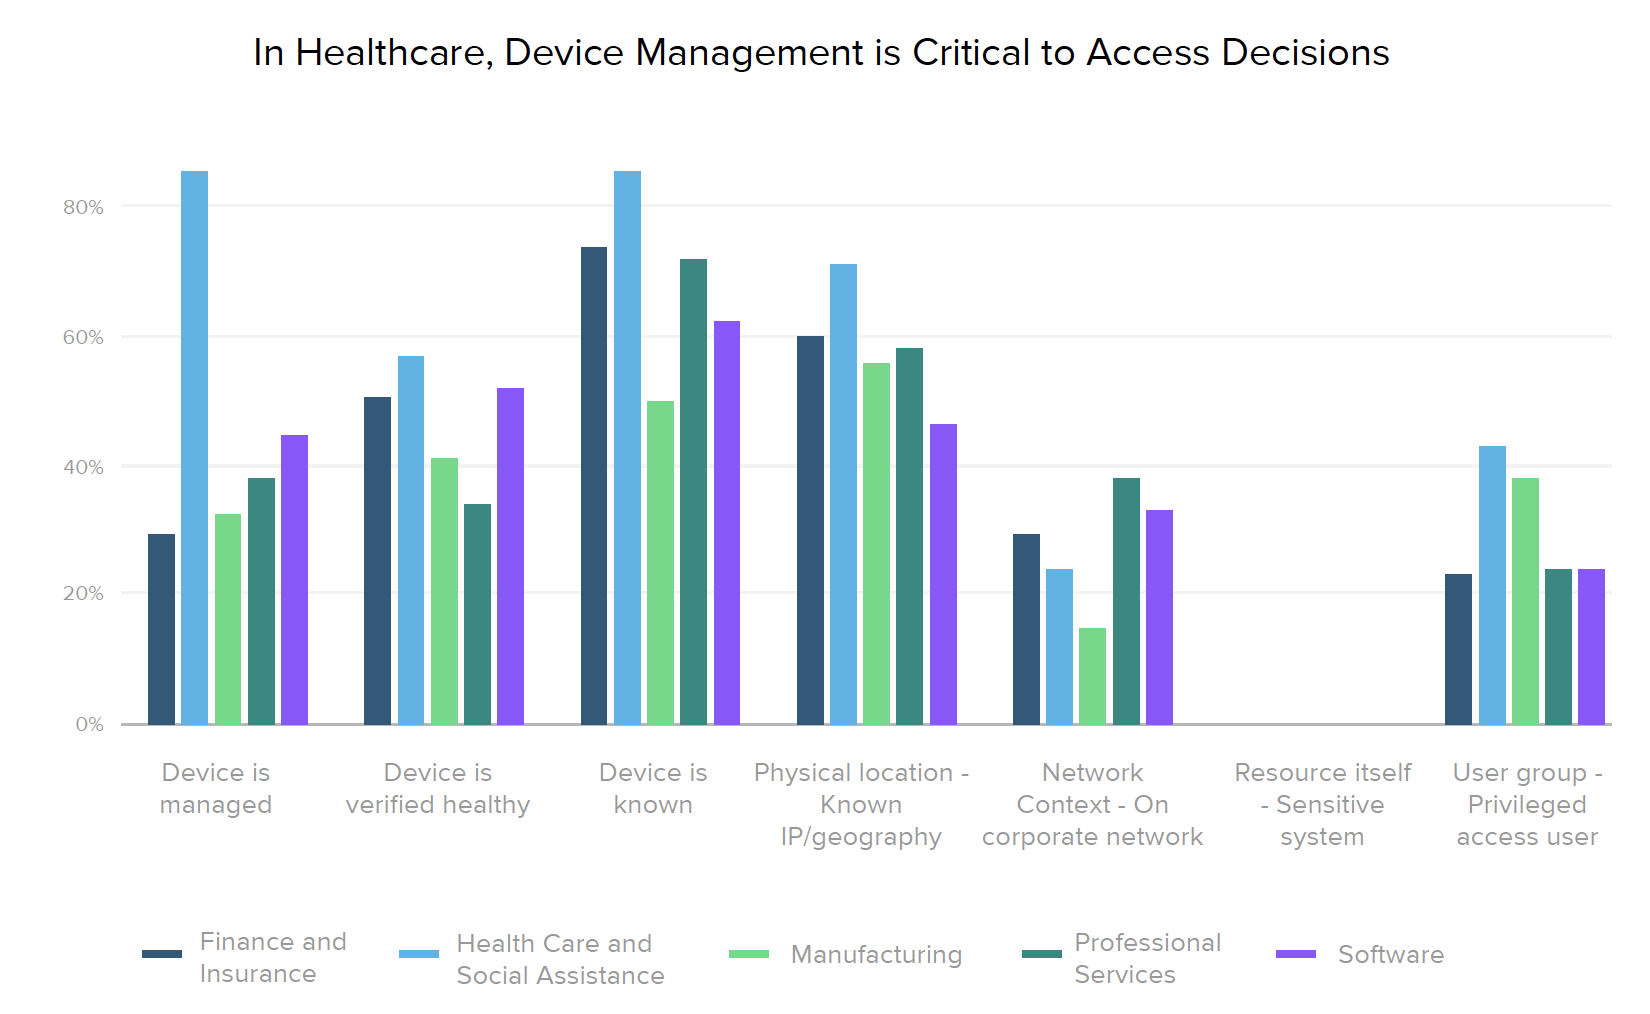 In Healthcare, Device Management is Critical to Access Decisions